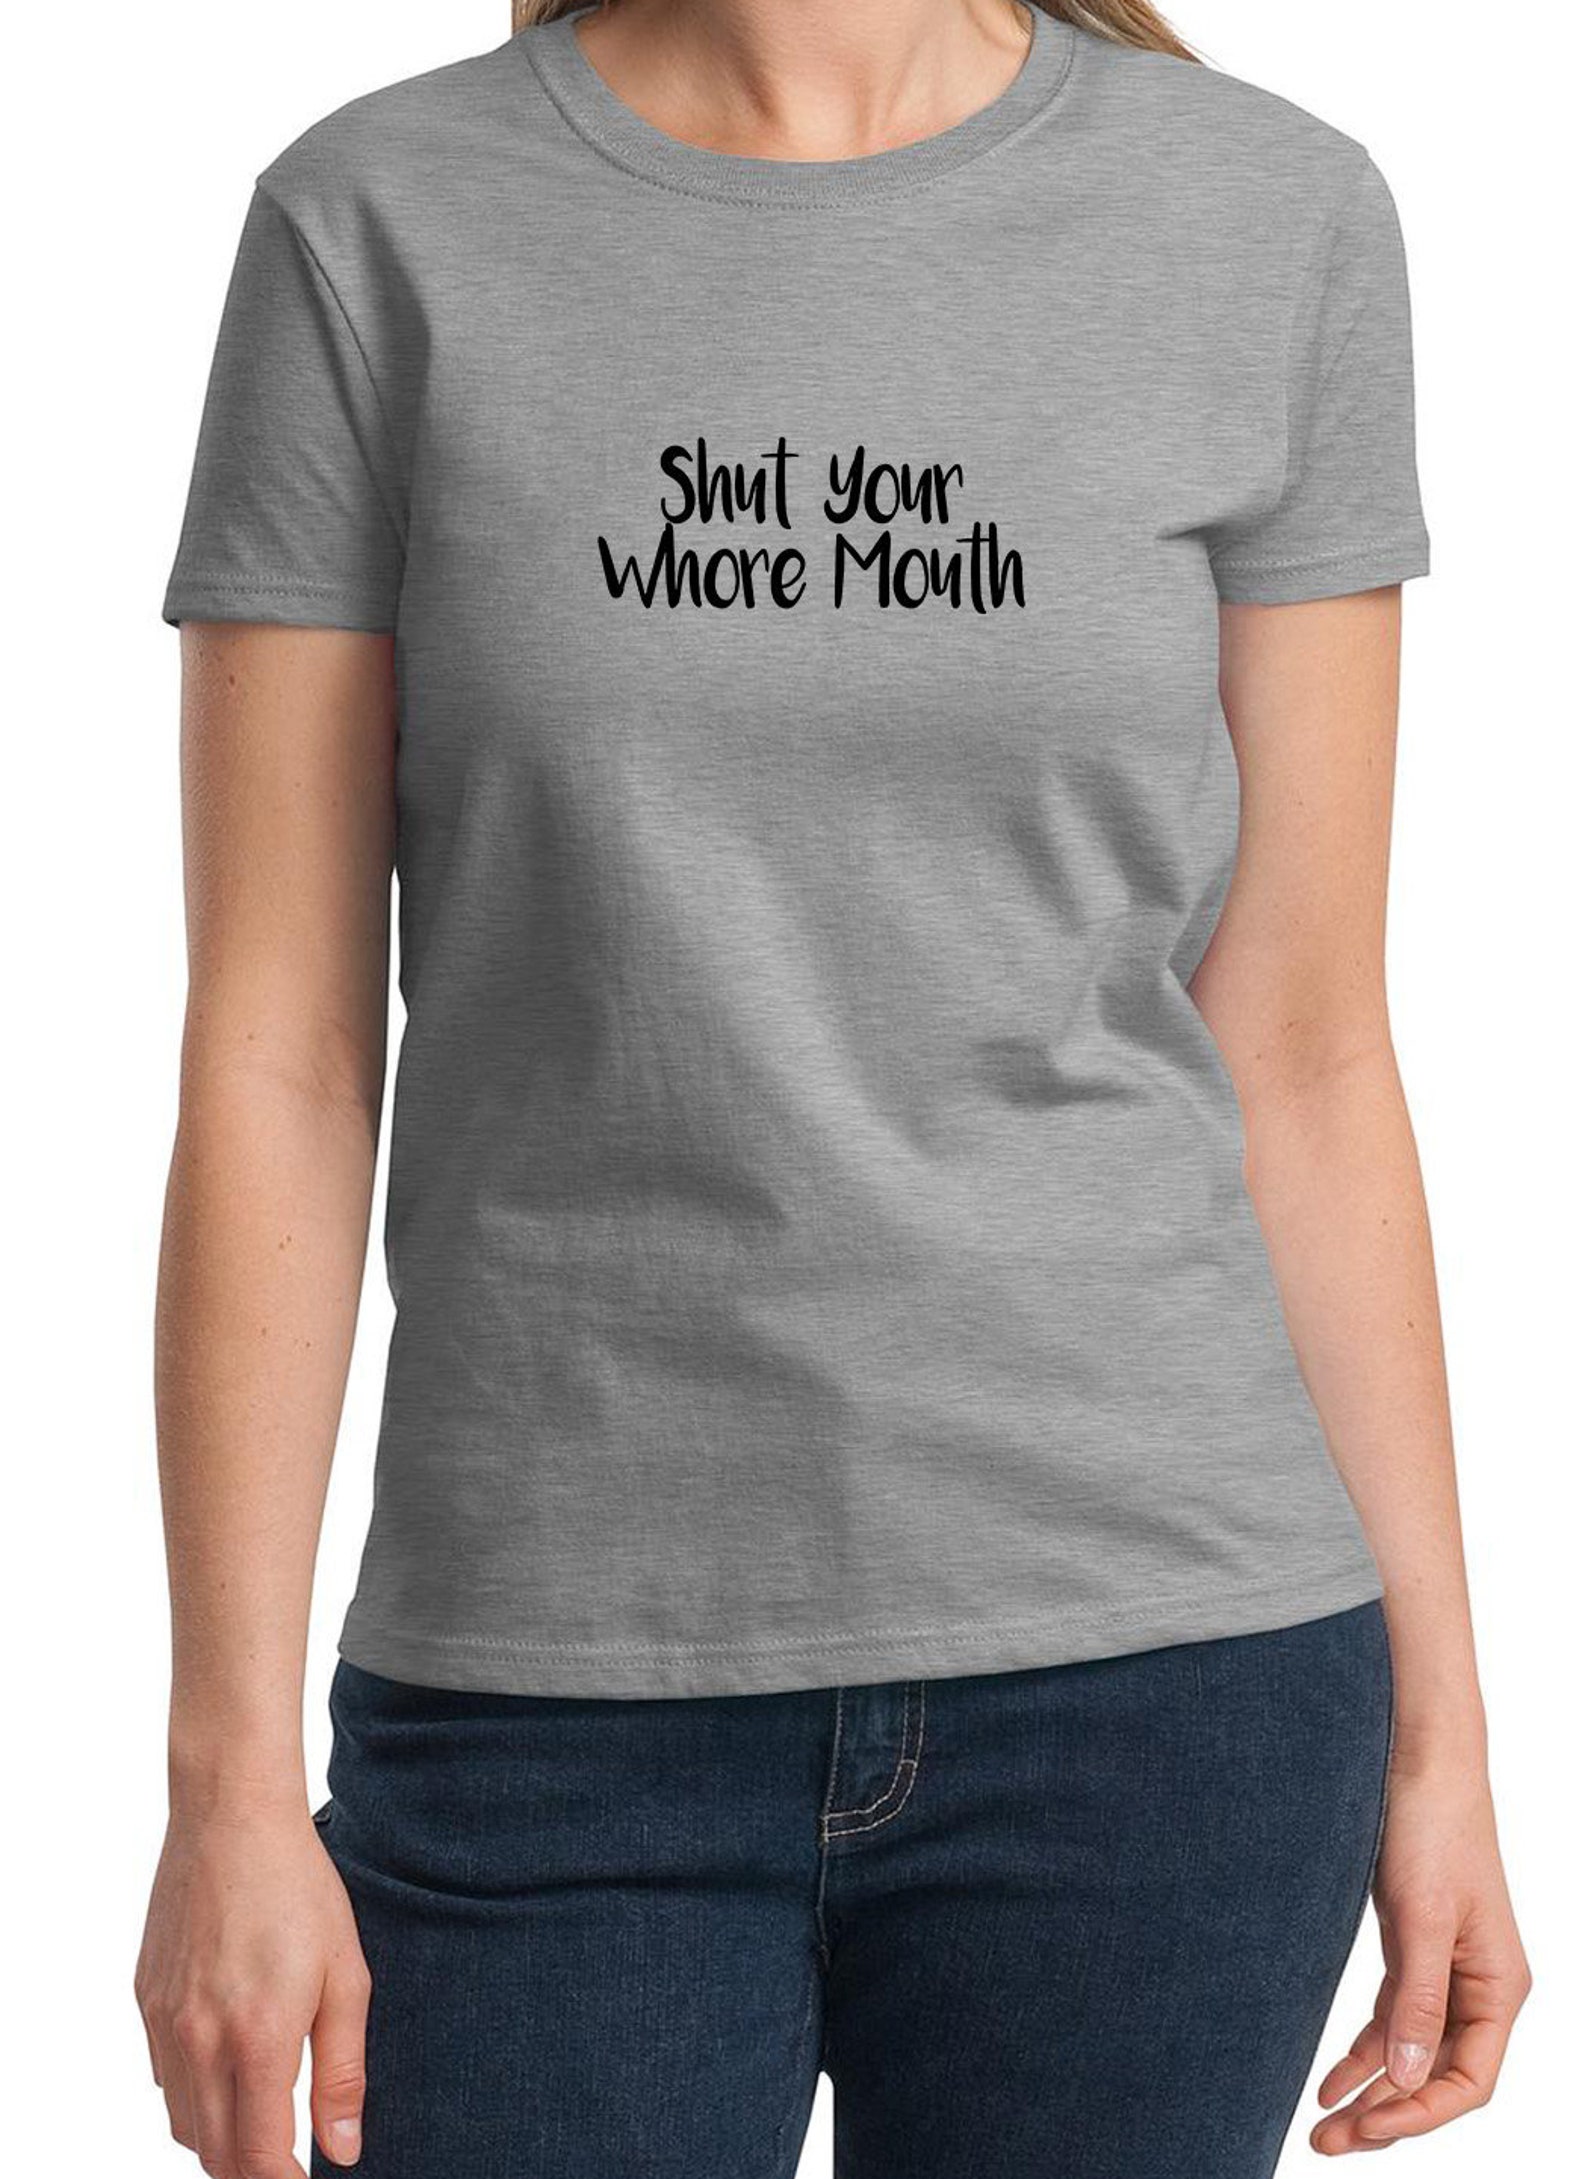 Shut Your Whore Mouth Ladies T-Shirt | Etsy